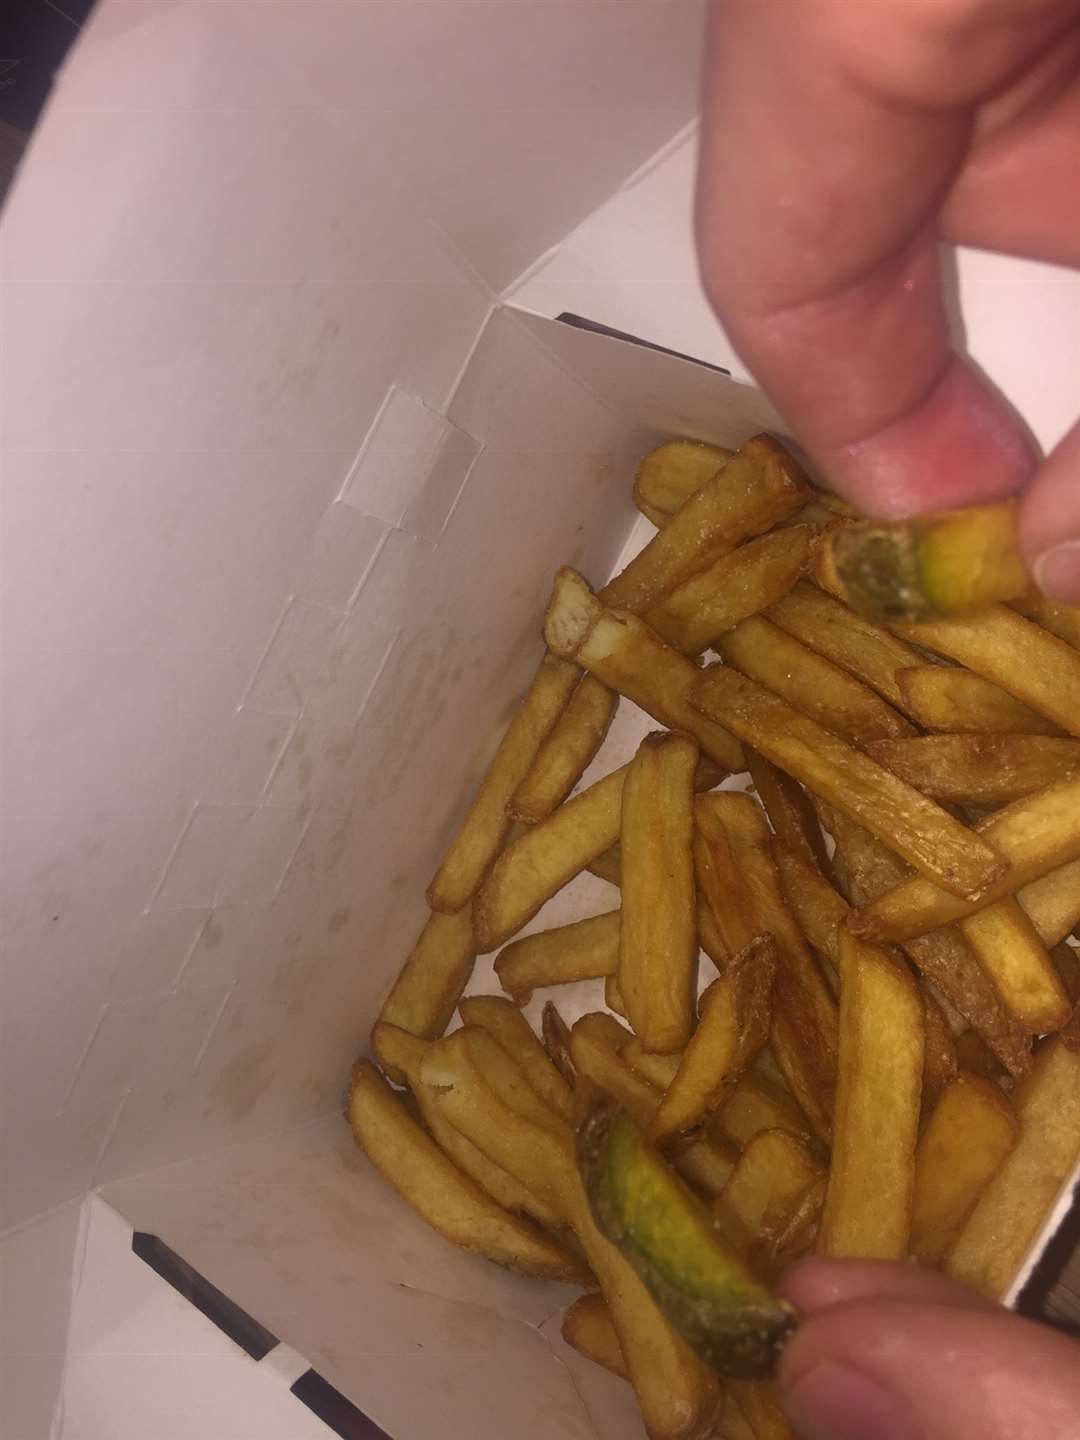 Max Thomas-John Hector says he won't eat KFC again after being served these chips (5723053)